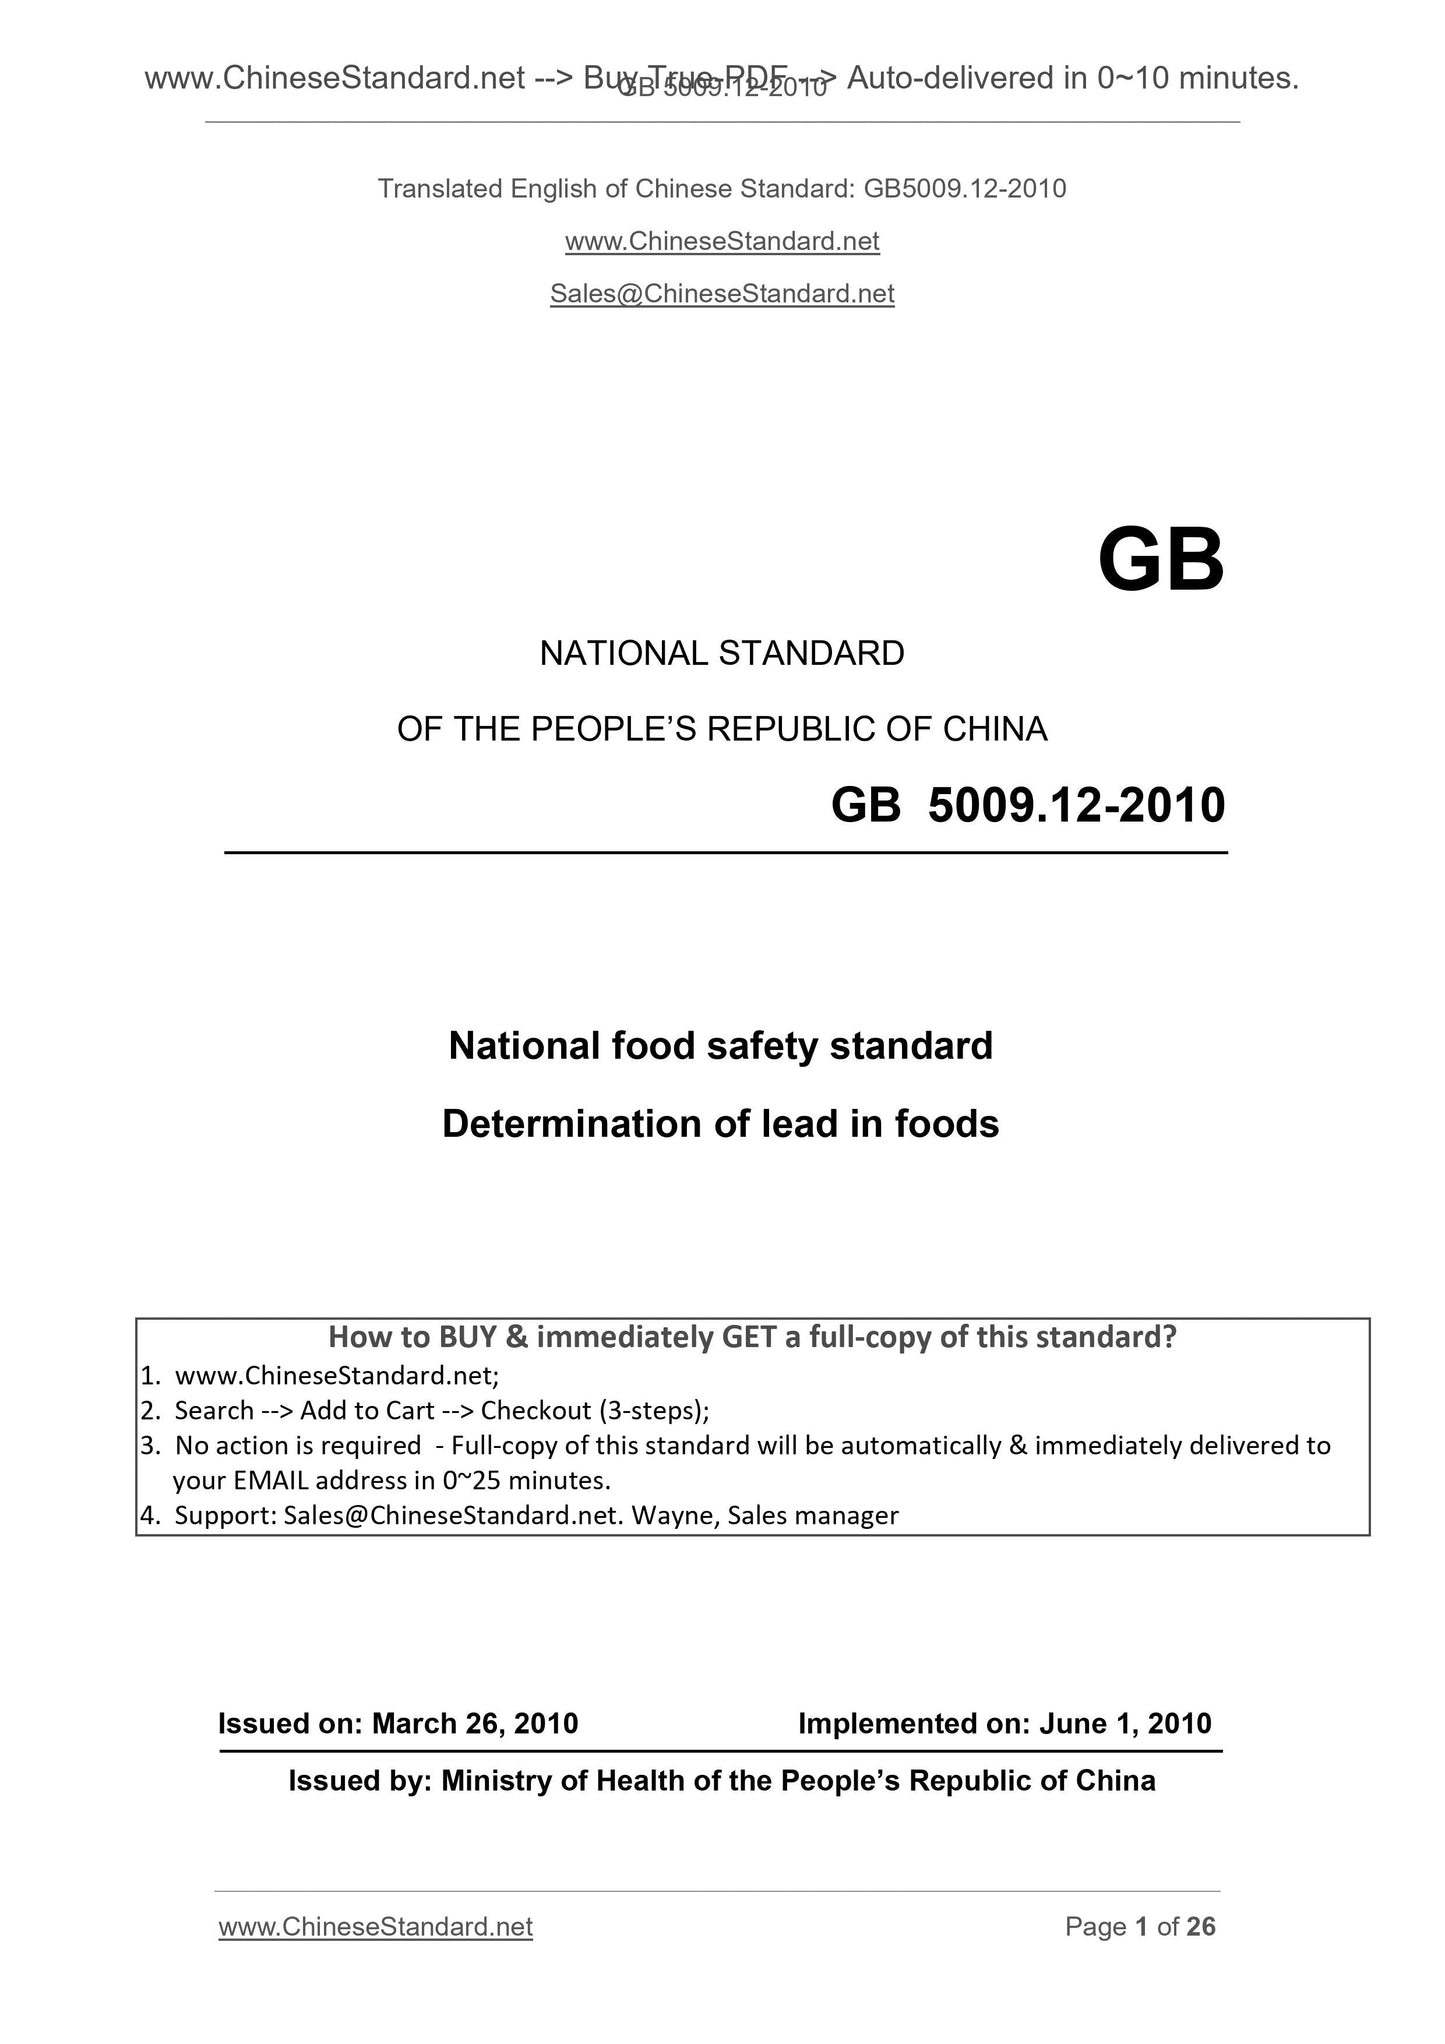 GB 5009.12-2010 Page 1